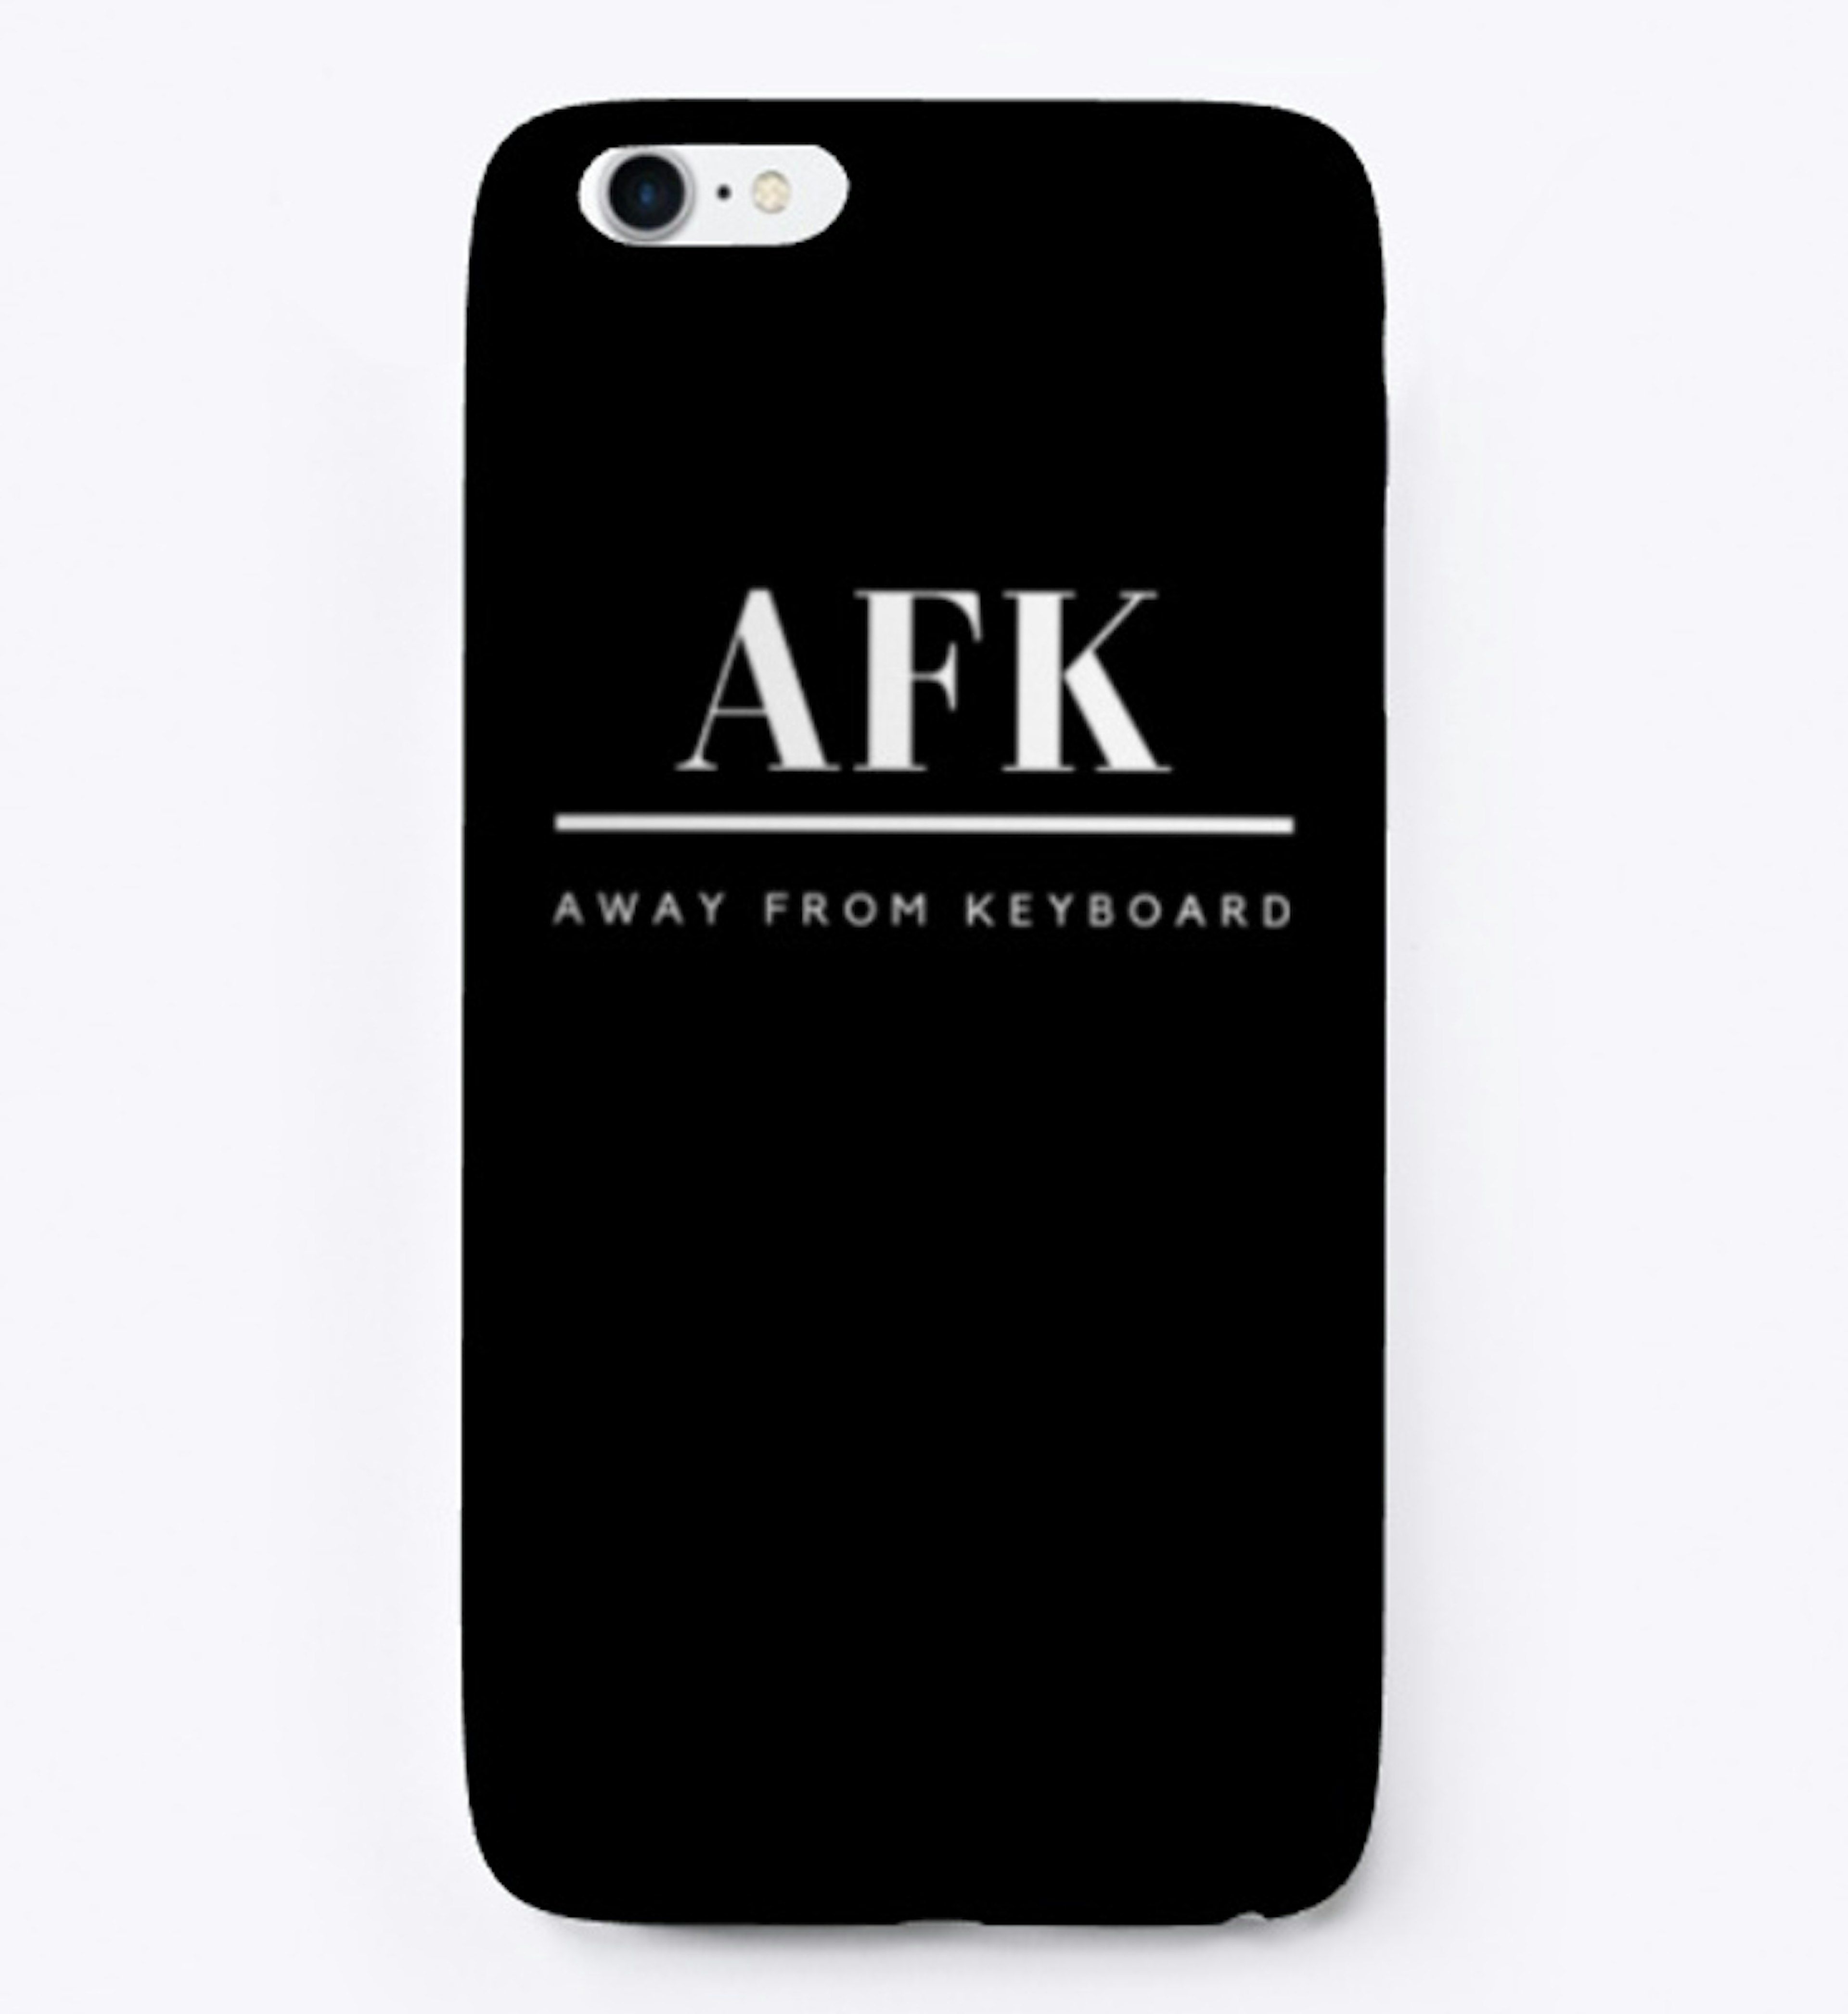 AFK - Away From Keyboard